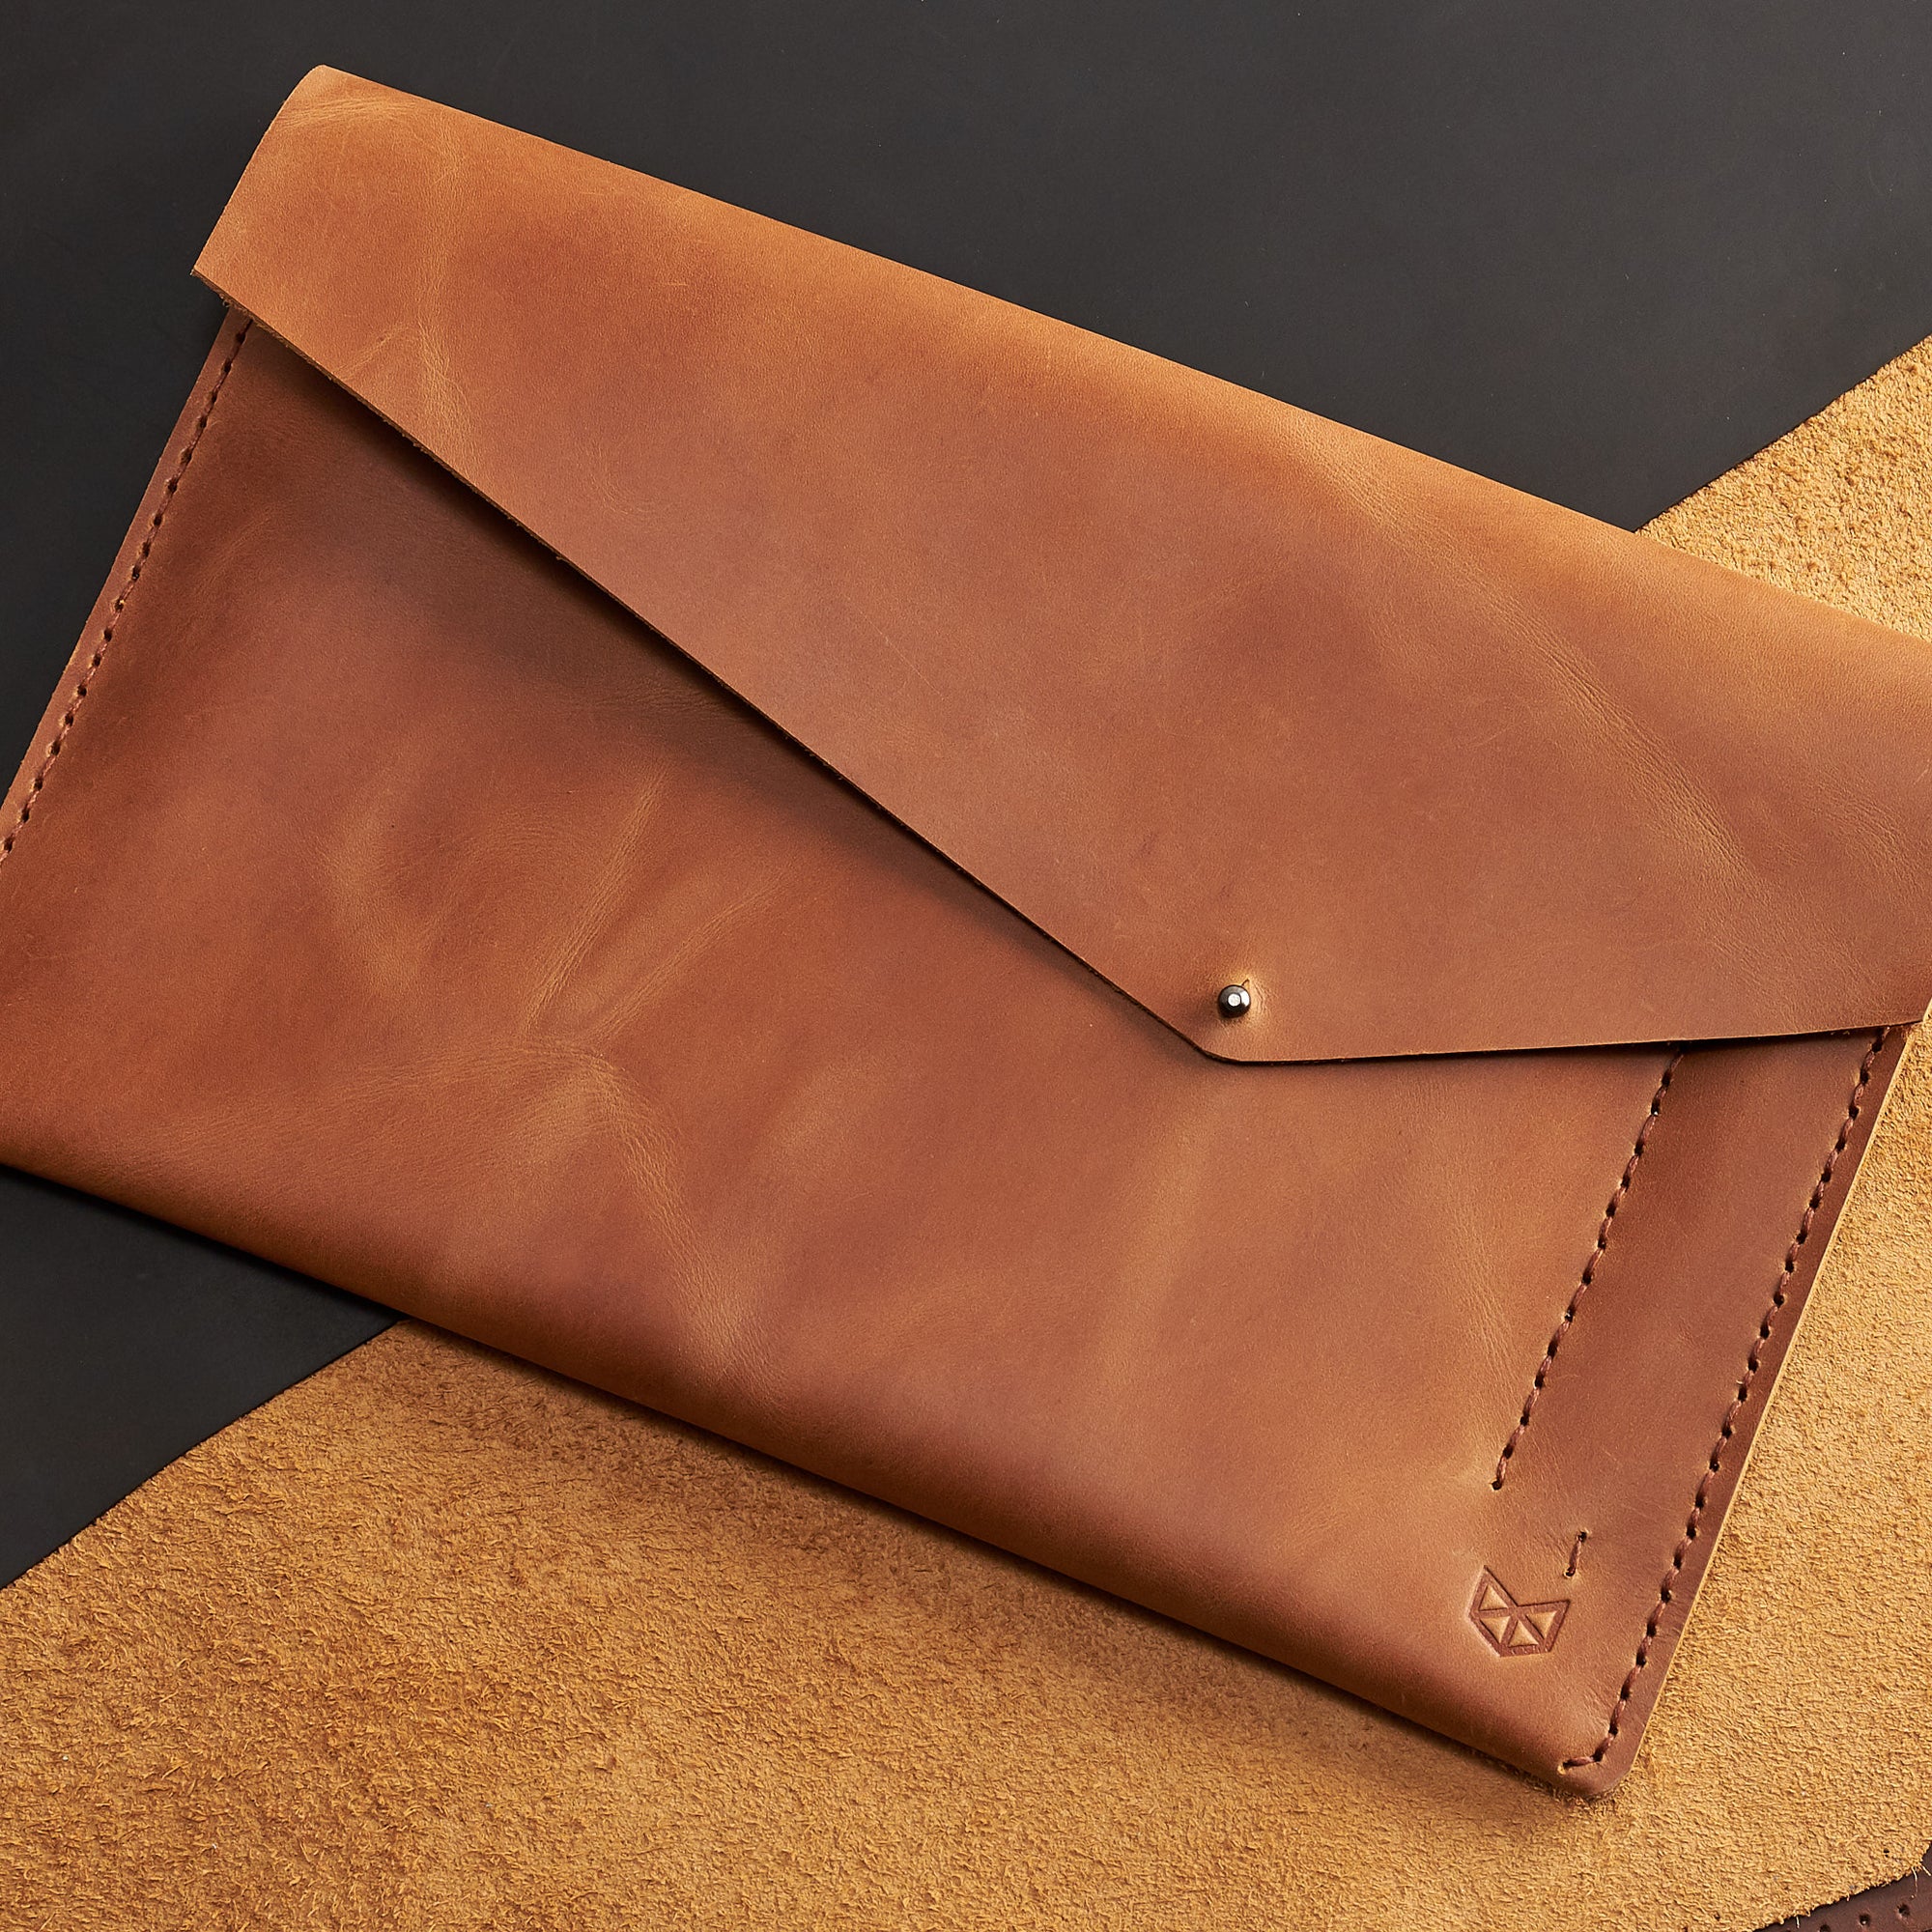 Style. Light brown handcrafted leather reMarkable tablet case. Folio with Marker holder. Paper E-ink tablet minimalist sleeve design. 